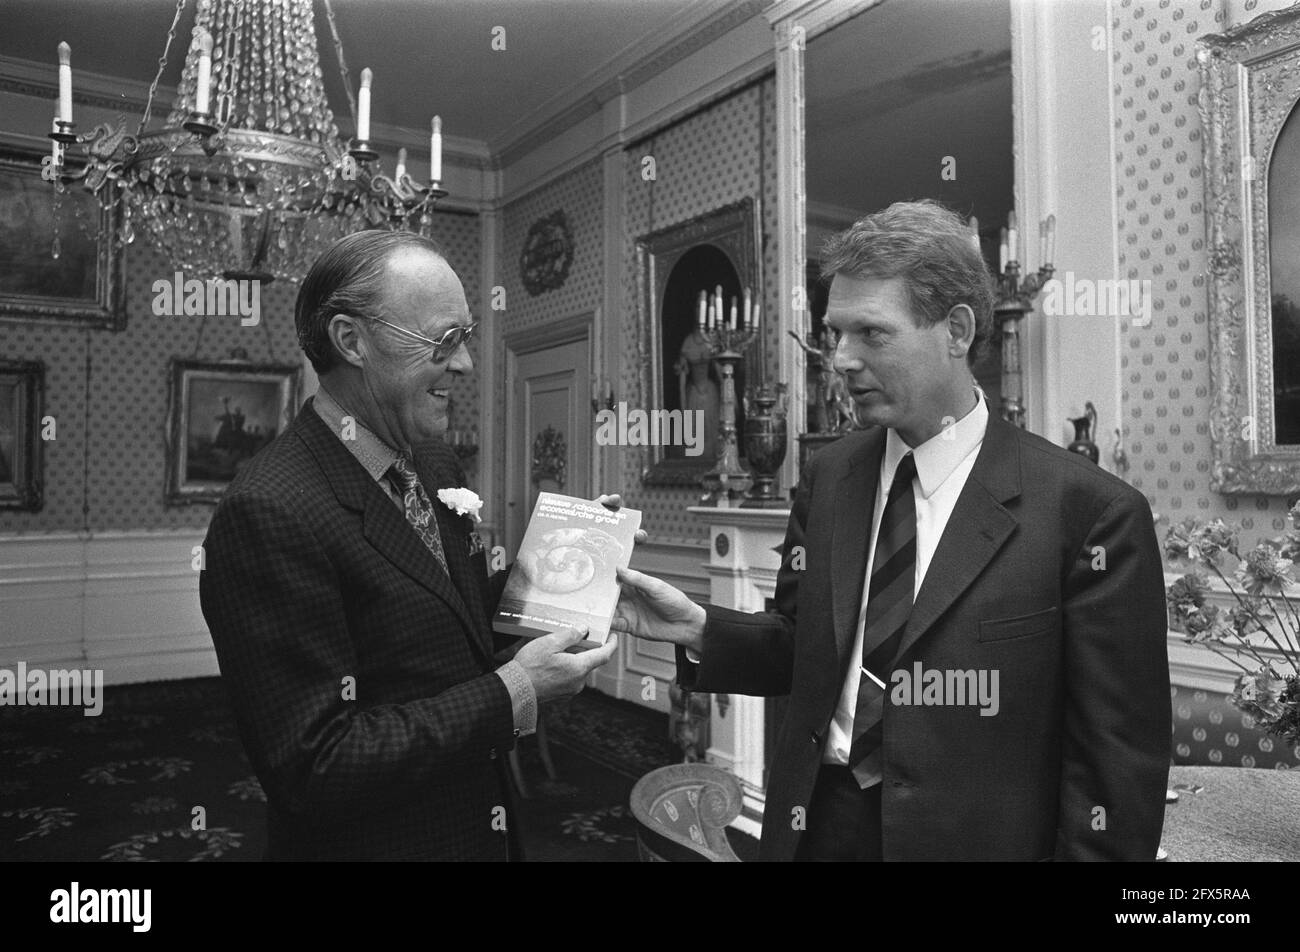 Prince Bernhard received copy of Drs. Hueting's thesis New scarcity and economic growth on Soestdijk, 1 May 1974, receipts, princes, The Netherlands, 20th century press agency photo, news to remember, documentary, historic photography 1945-1990, visual stories, human history of the Twentieth Century, capturing moments in time Stock Photo